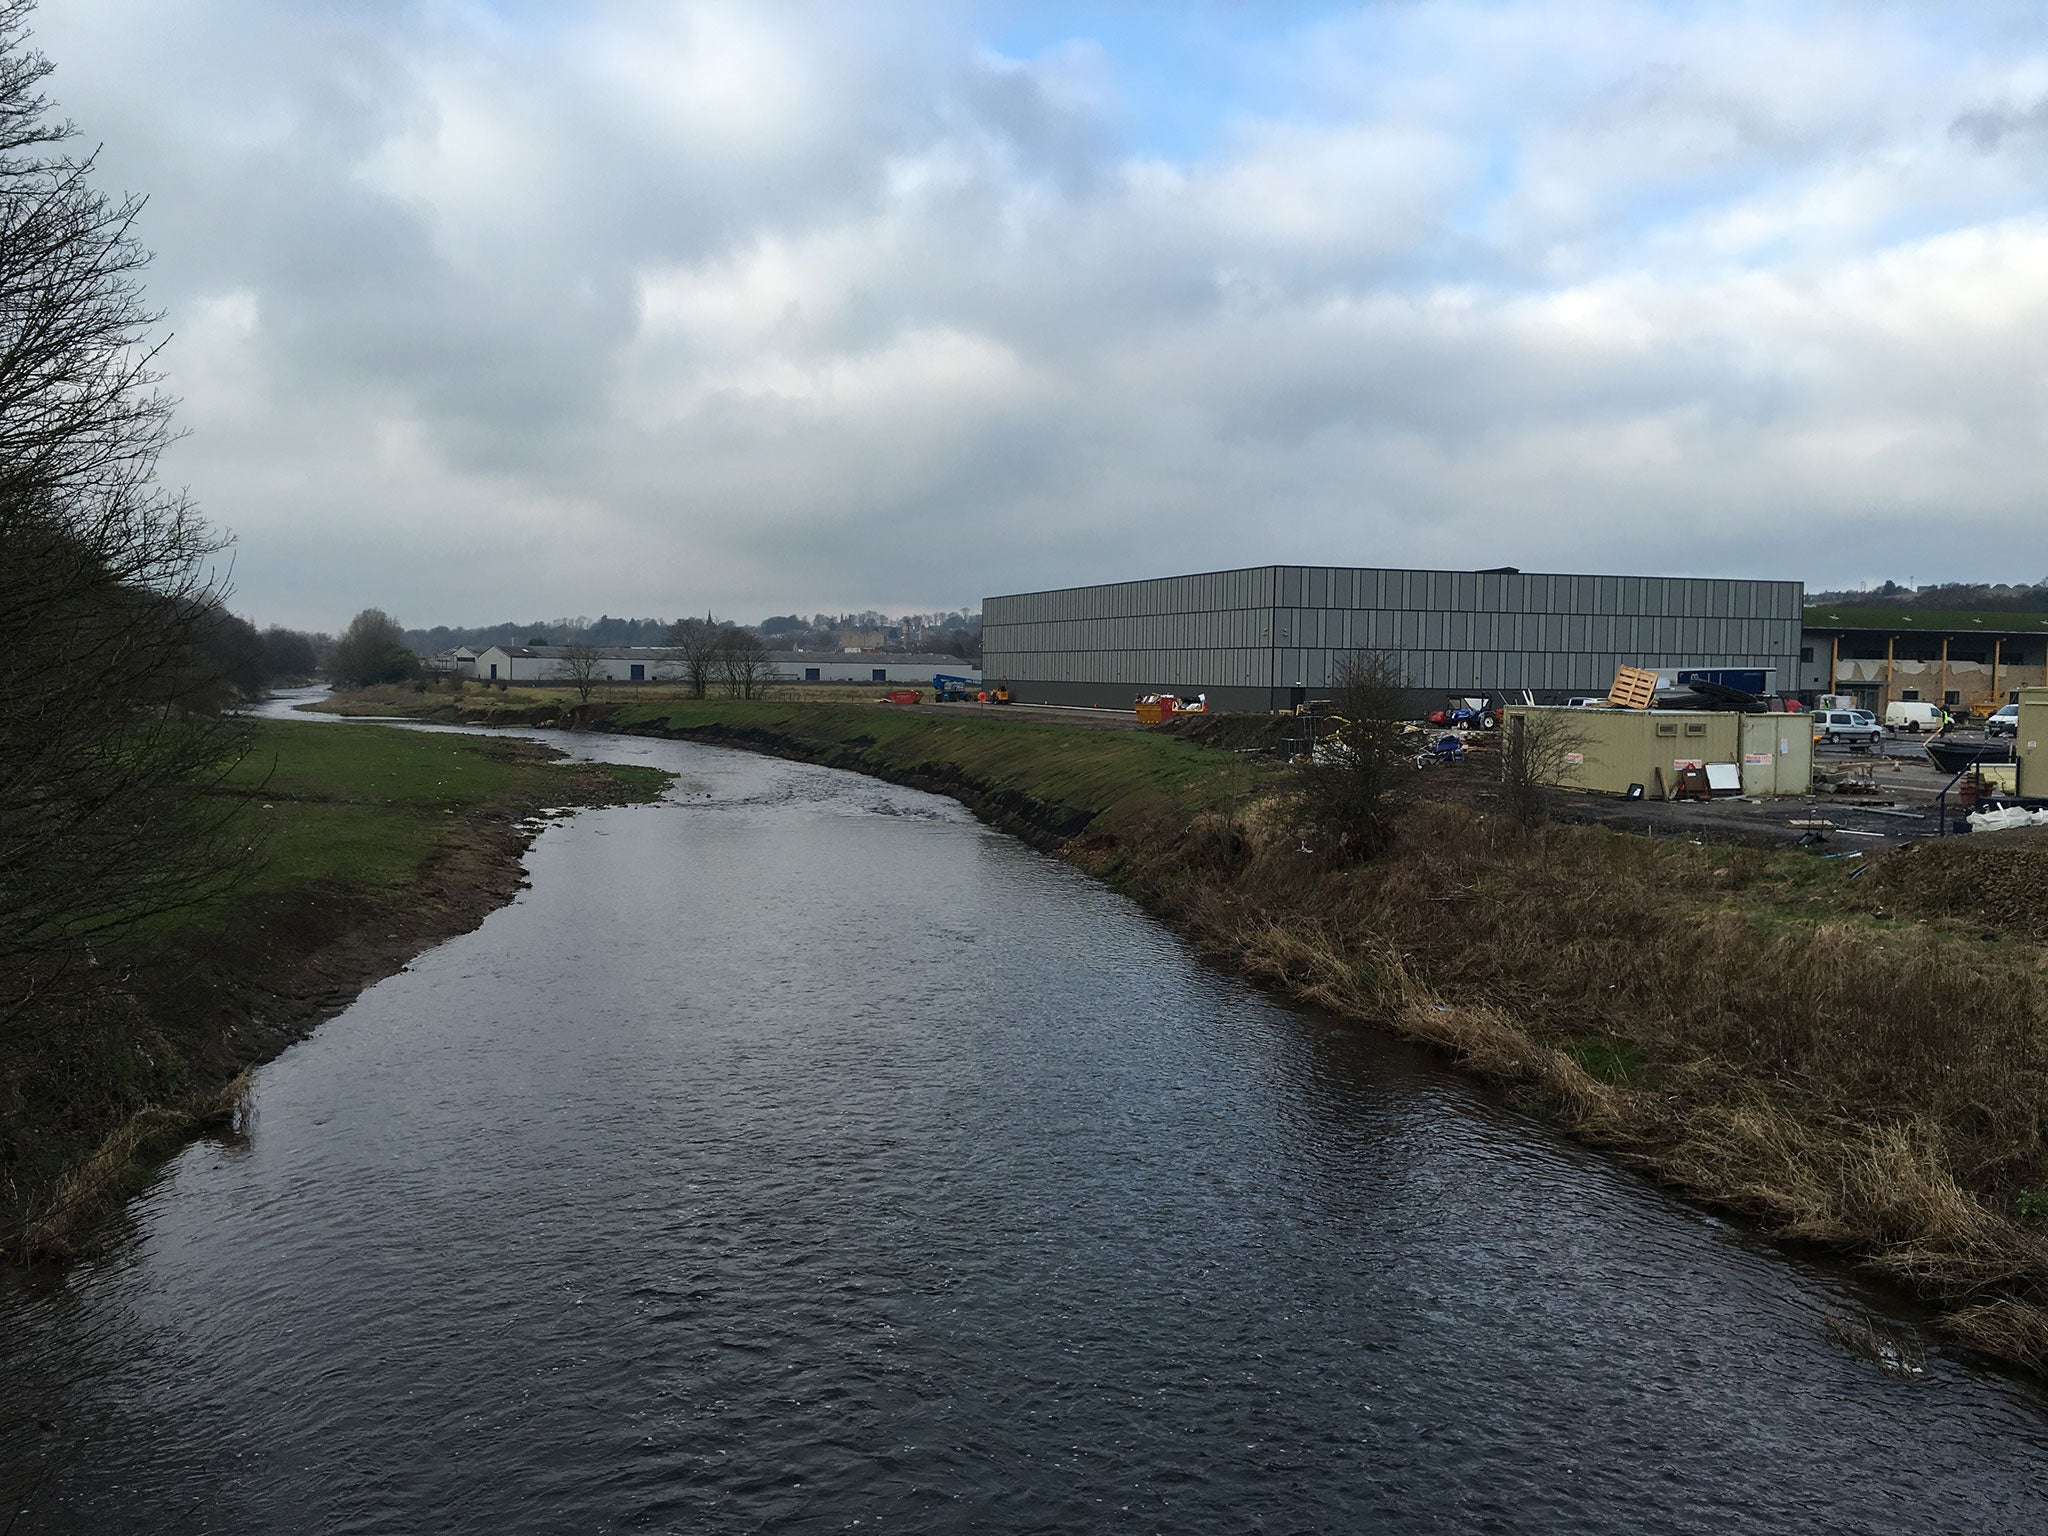 Burnley’s players face the threat of a dip in the River Calder if they step out of line. Work is being completed on club’s new training centre on the right